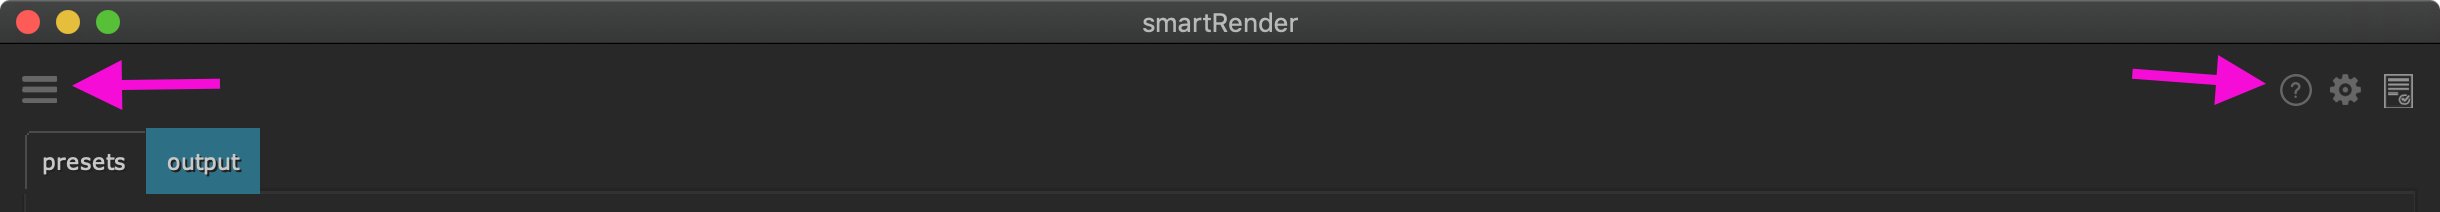 _images/smartRender_top_buttons.png